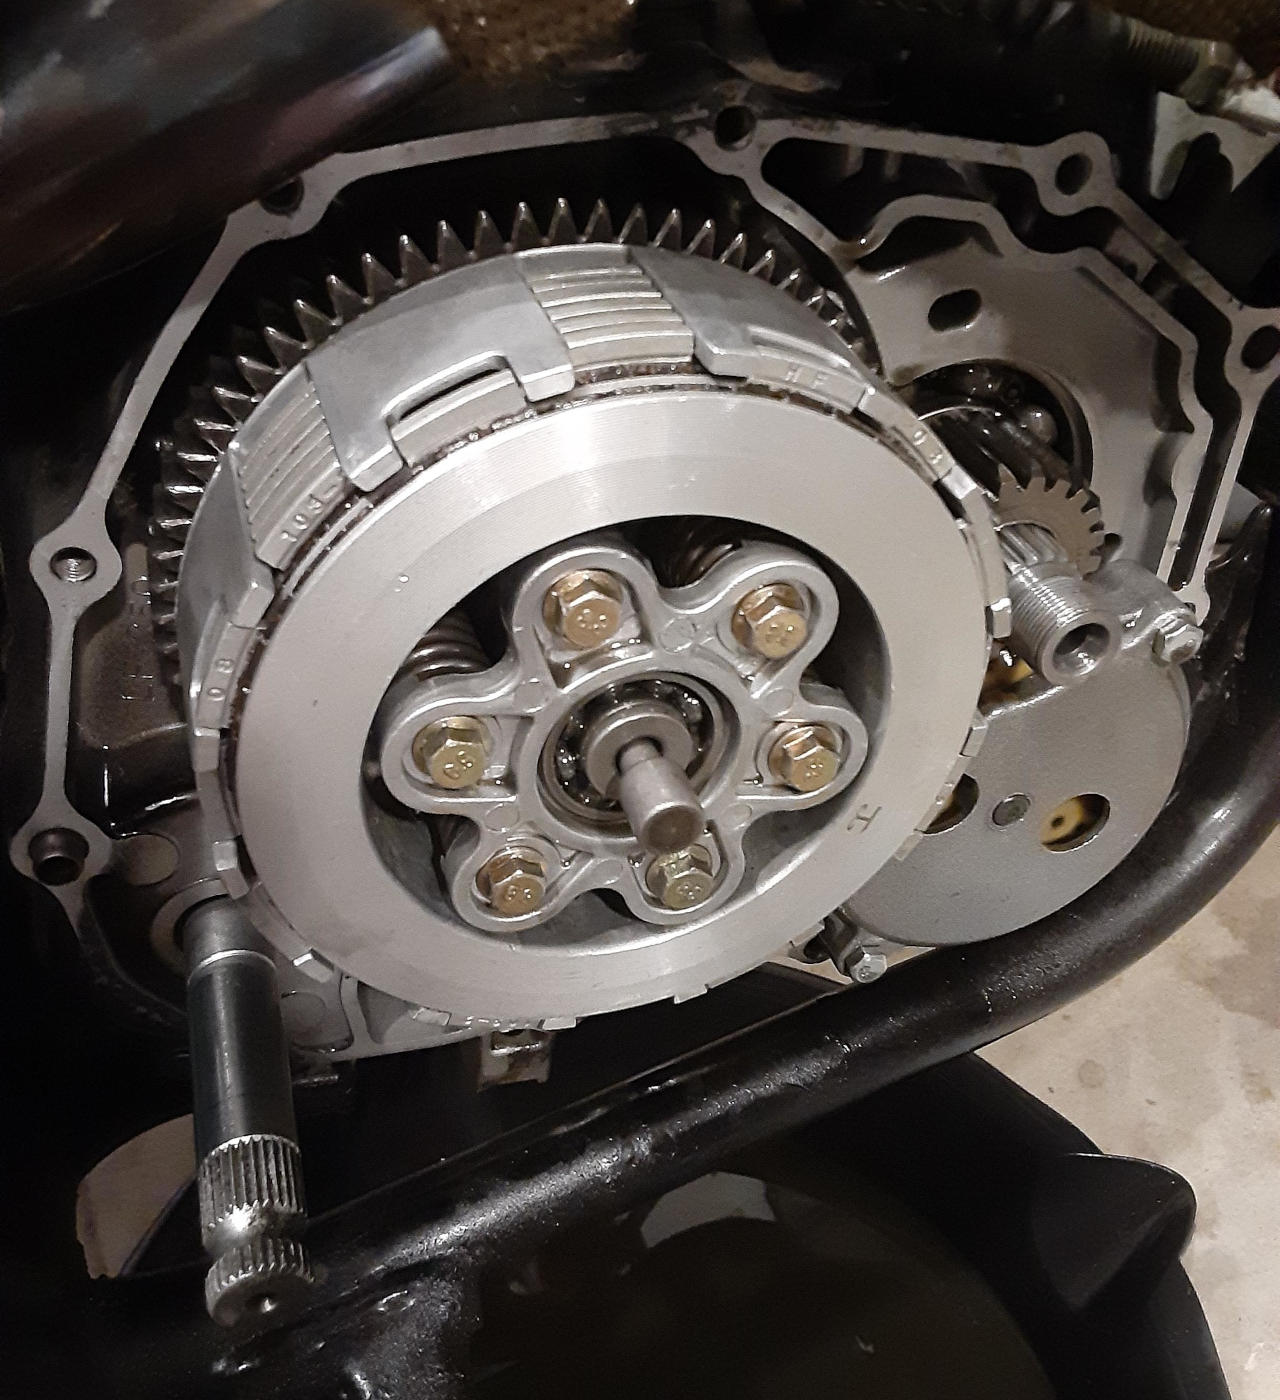 TBR7 Motorcycle clutch with push rod visible.